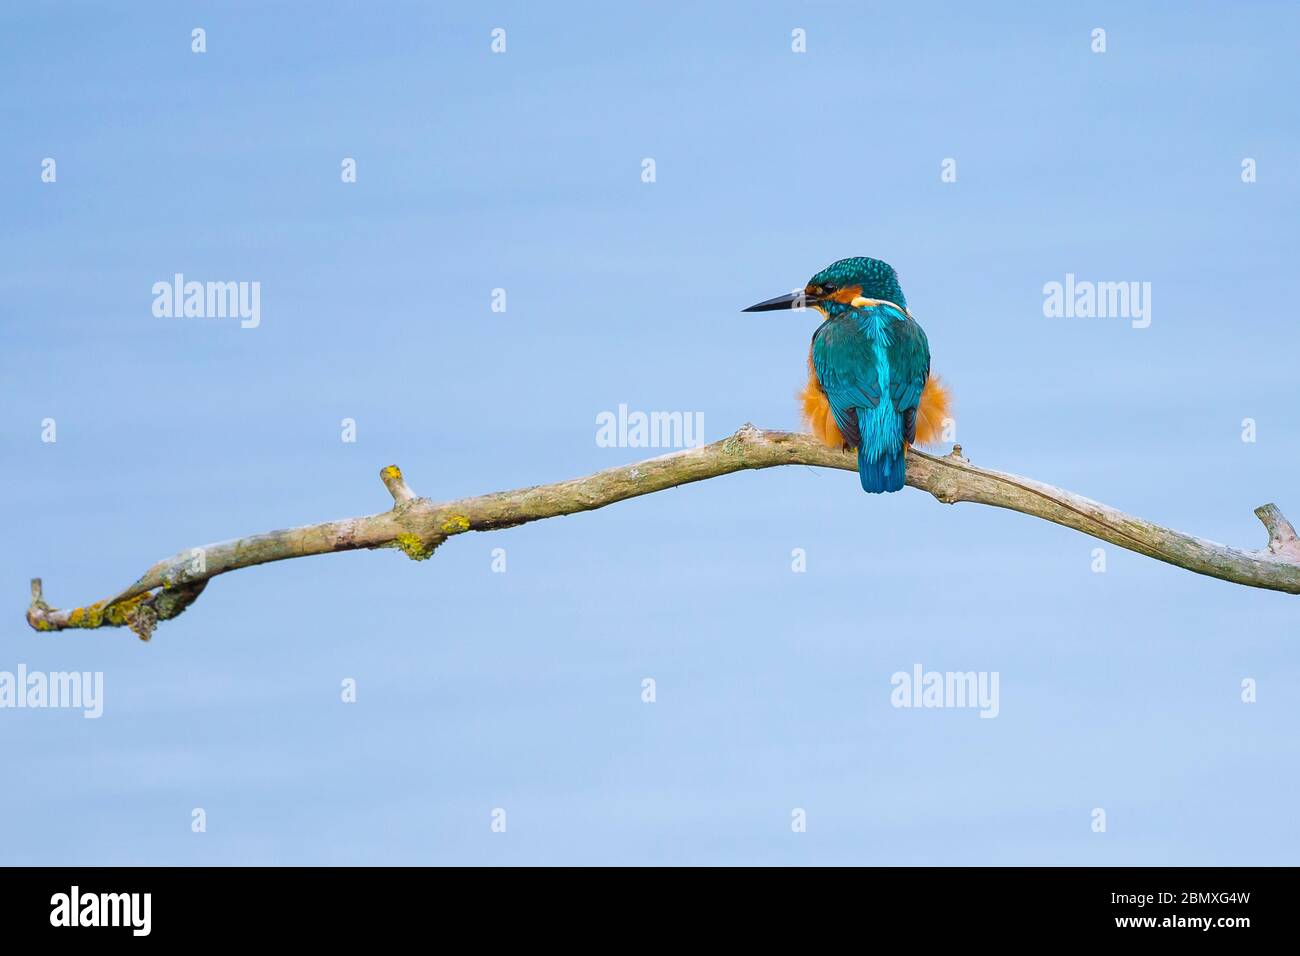 Rear view close up of wild UK kingfisher bird (Alcedo atthis) isolated on branch over water, looking left. British birds, kingfishers. Stock Photo